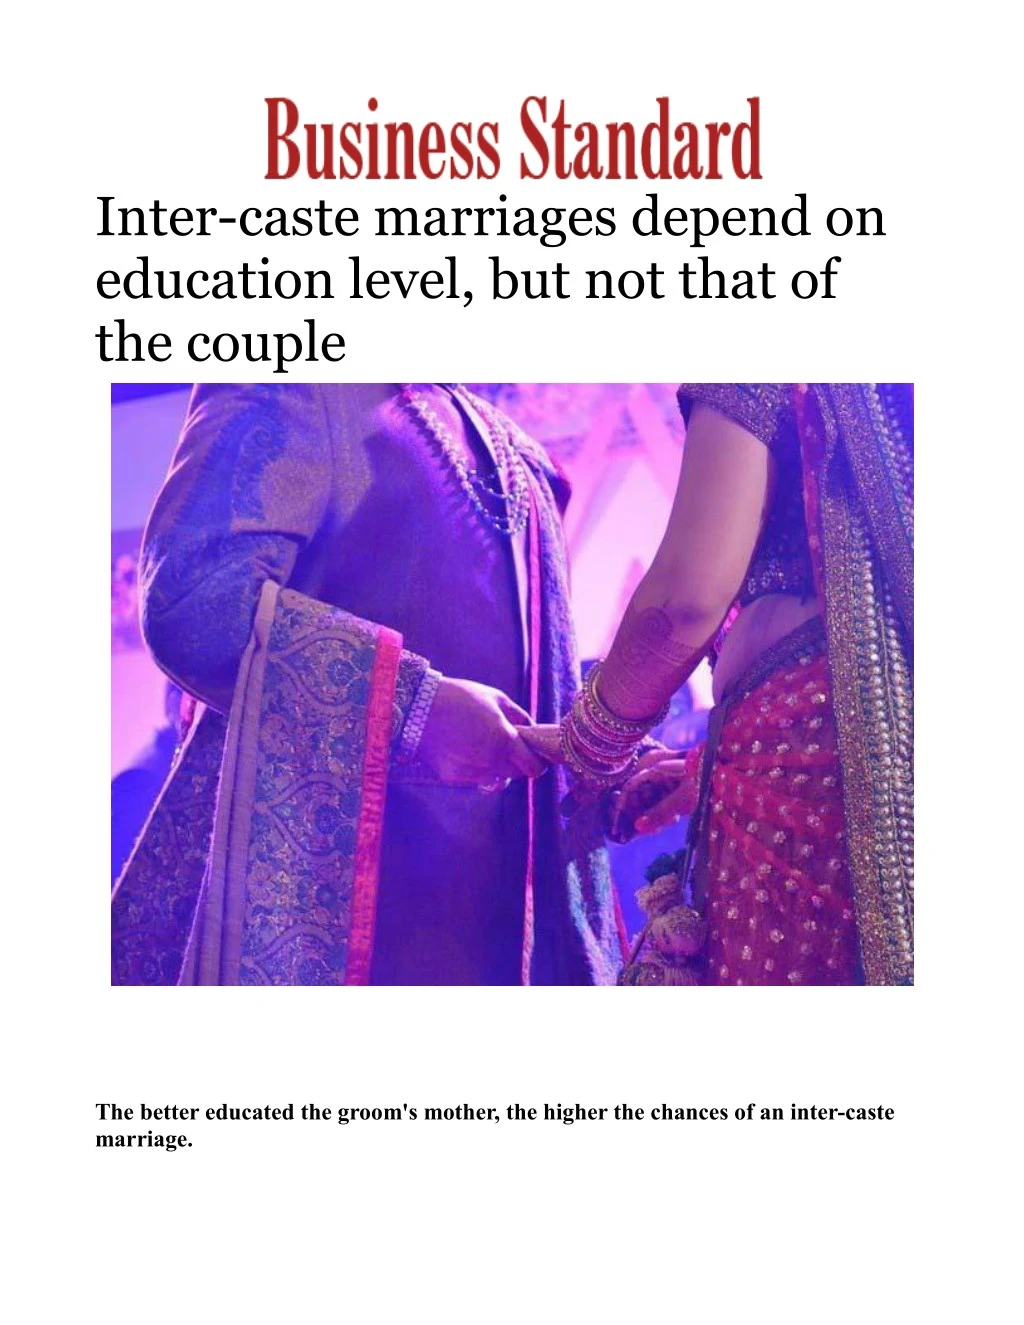 inter caste marriages depend on education level